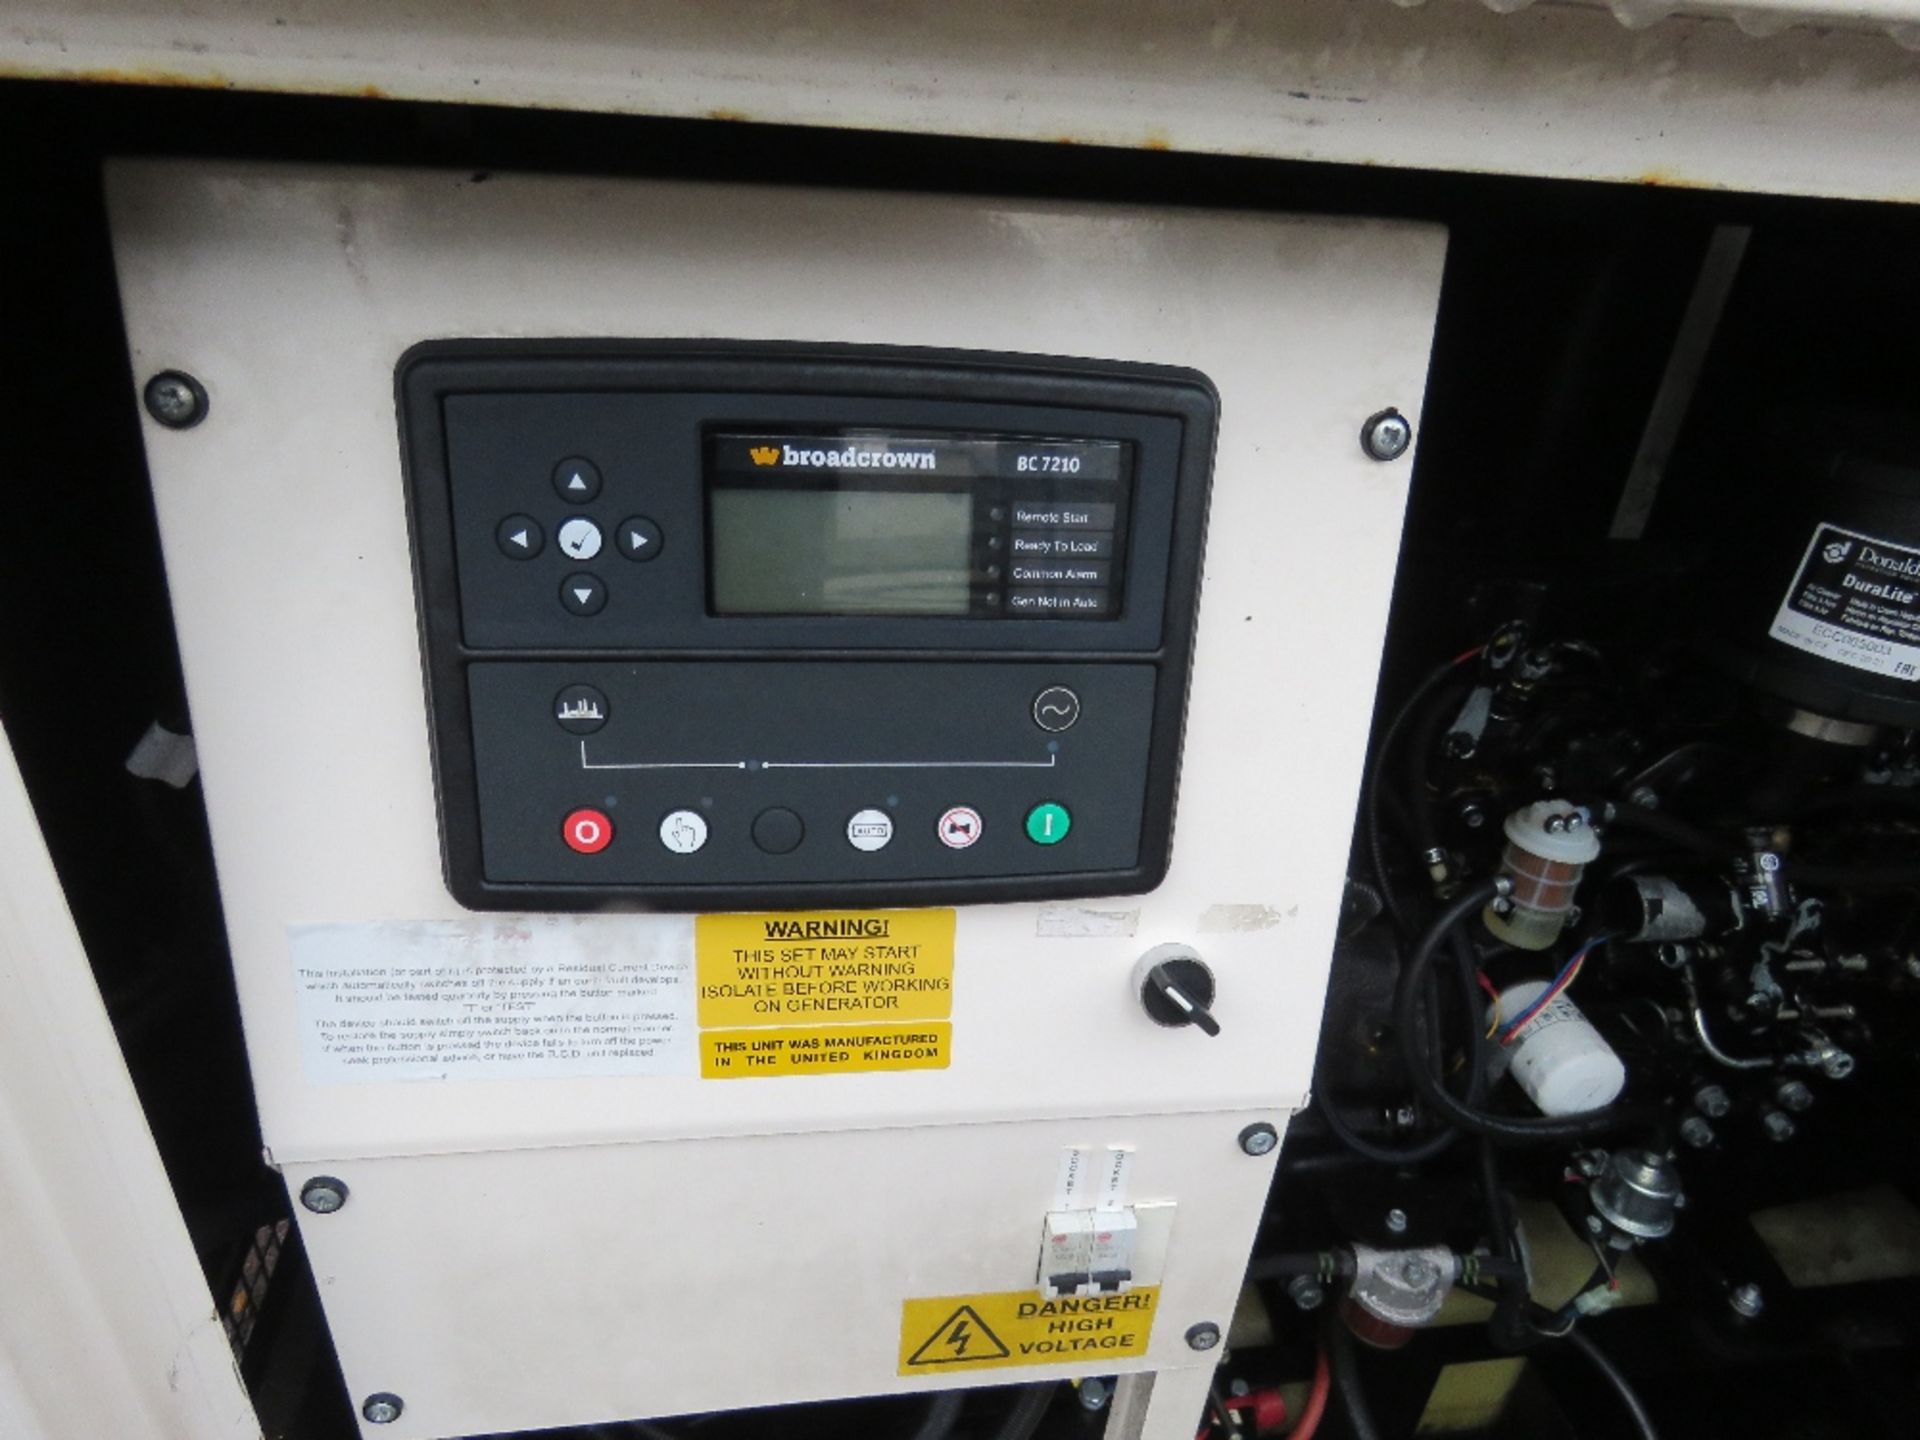 JCB 11KVA SKID MOUNTED SILENCED GENERATOR, SINGLE PHASE 240V OUTPUT, 2016 BUILD. SOURCED FROM MAJOR - Image 2 of 5